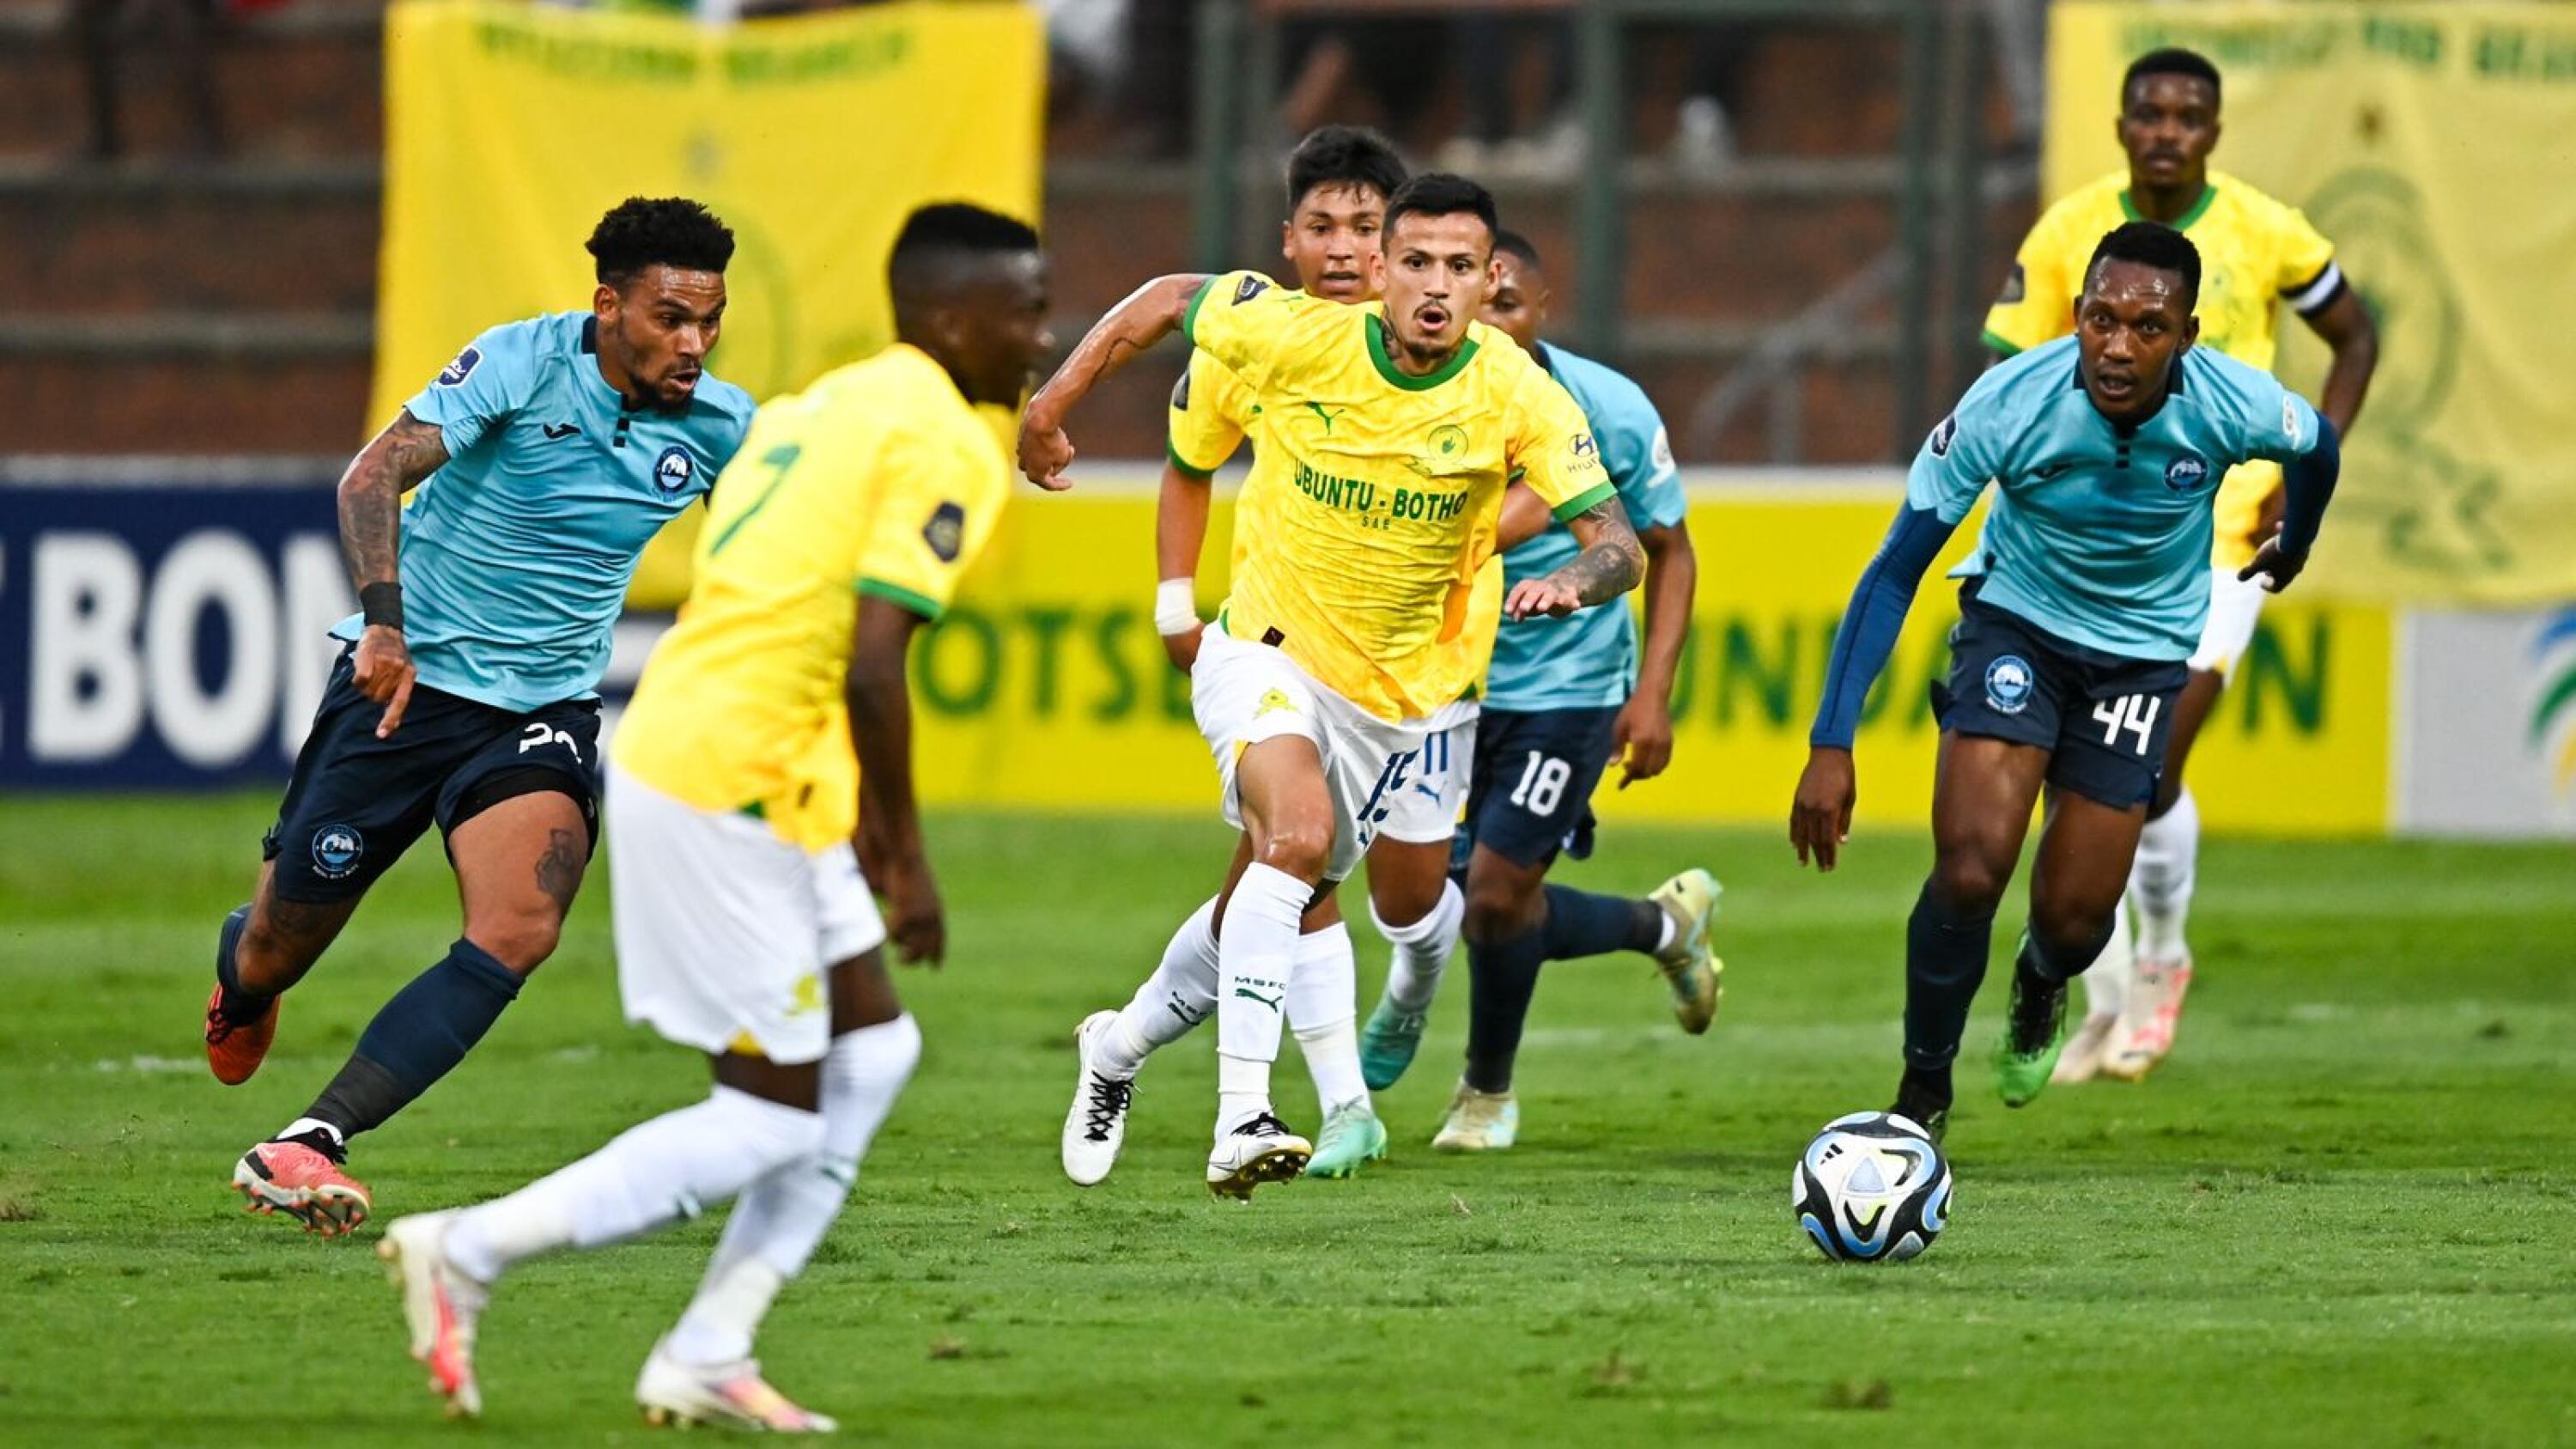 Mamelodi Sundowns’ Junior Mendieta finds the gap during their DStv Premiership game against against Richards Bay at King Goodwill Zwelithini Stadium in Durban on Wednesday